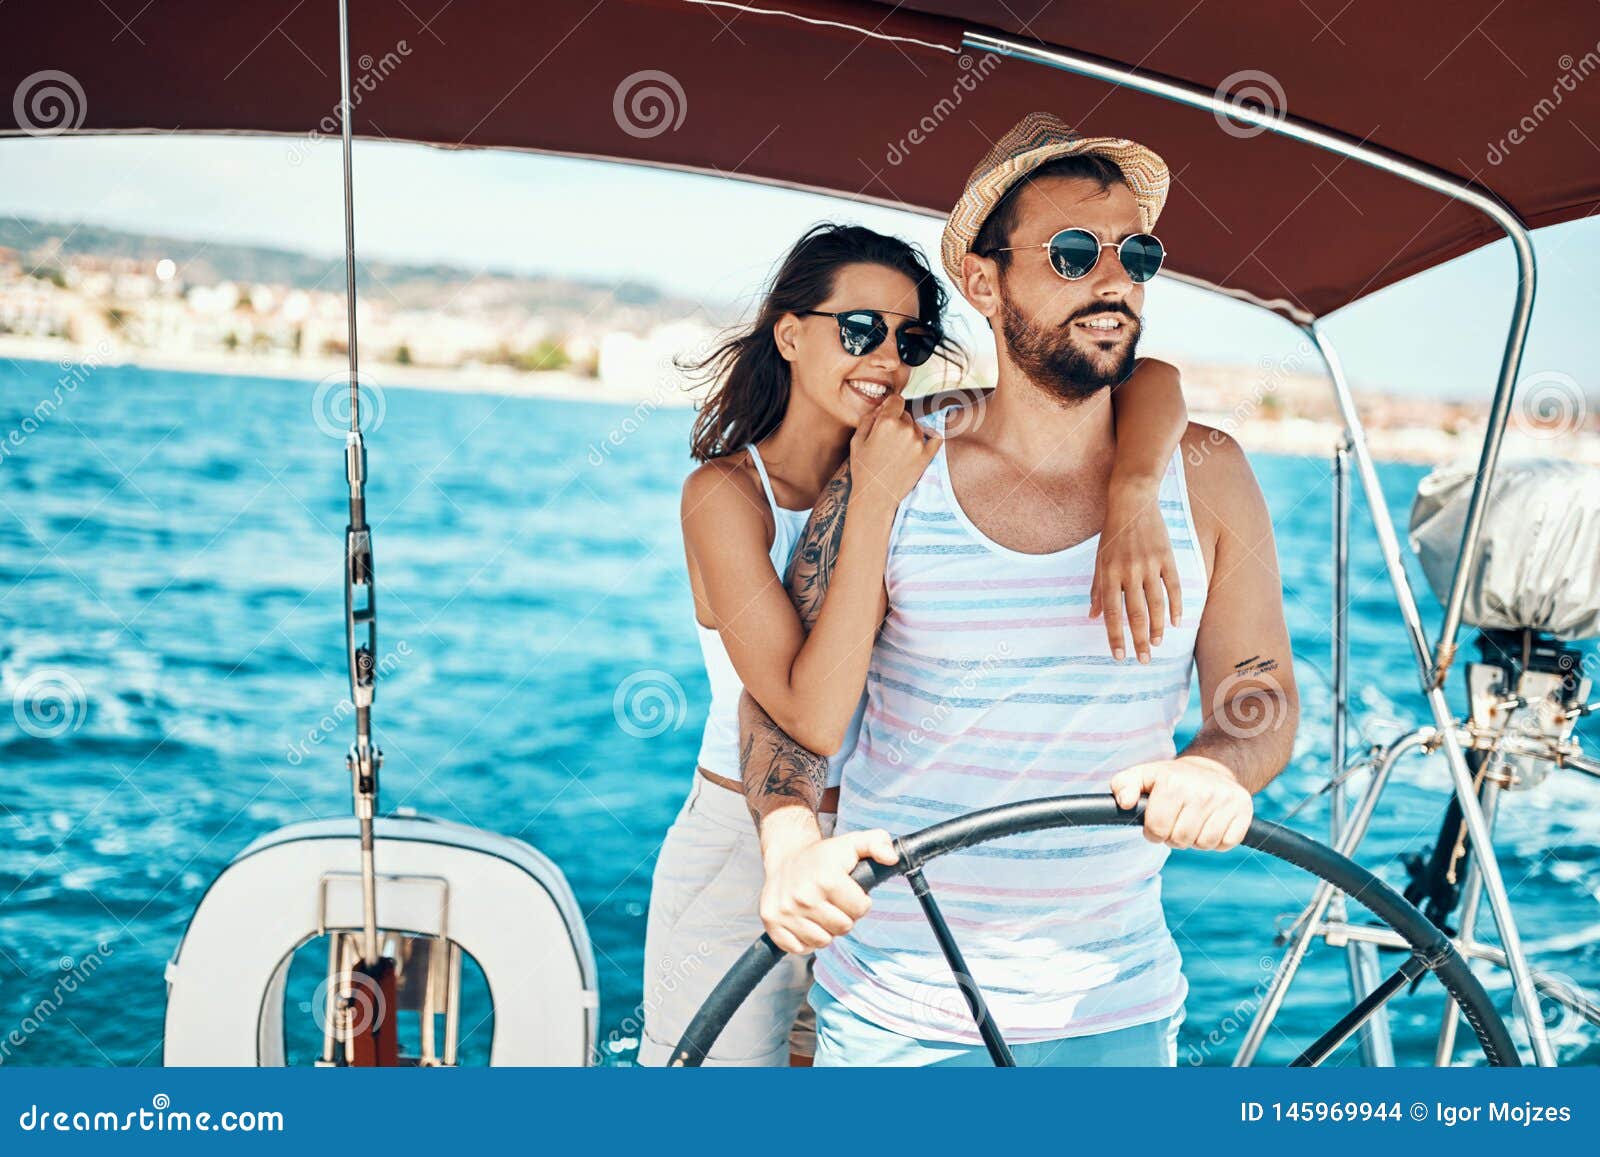 couple on yacht poster